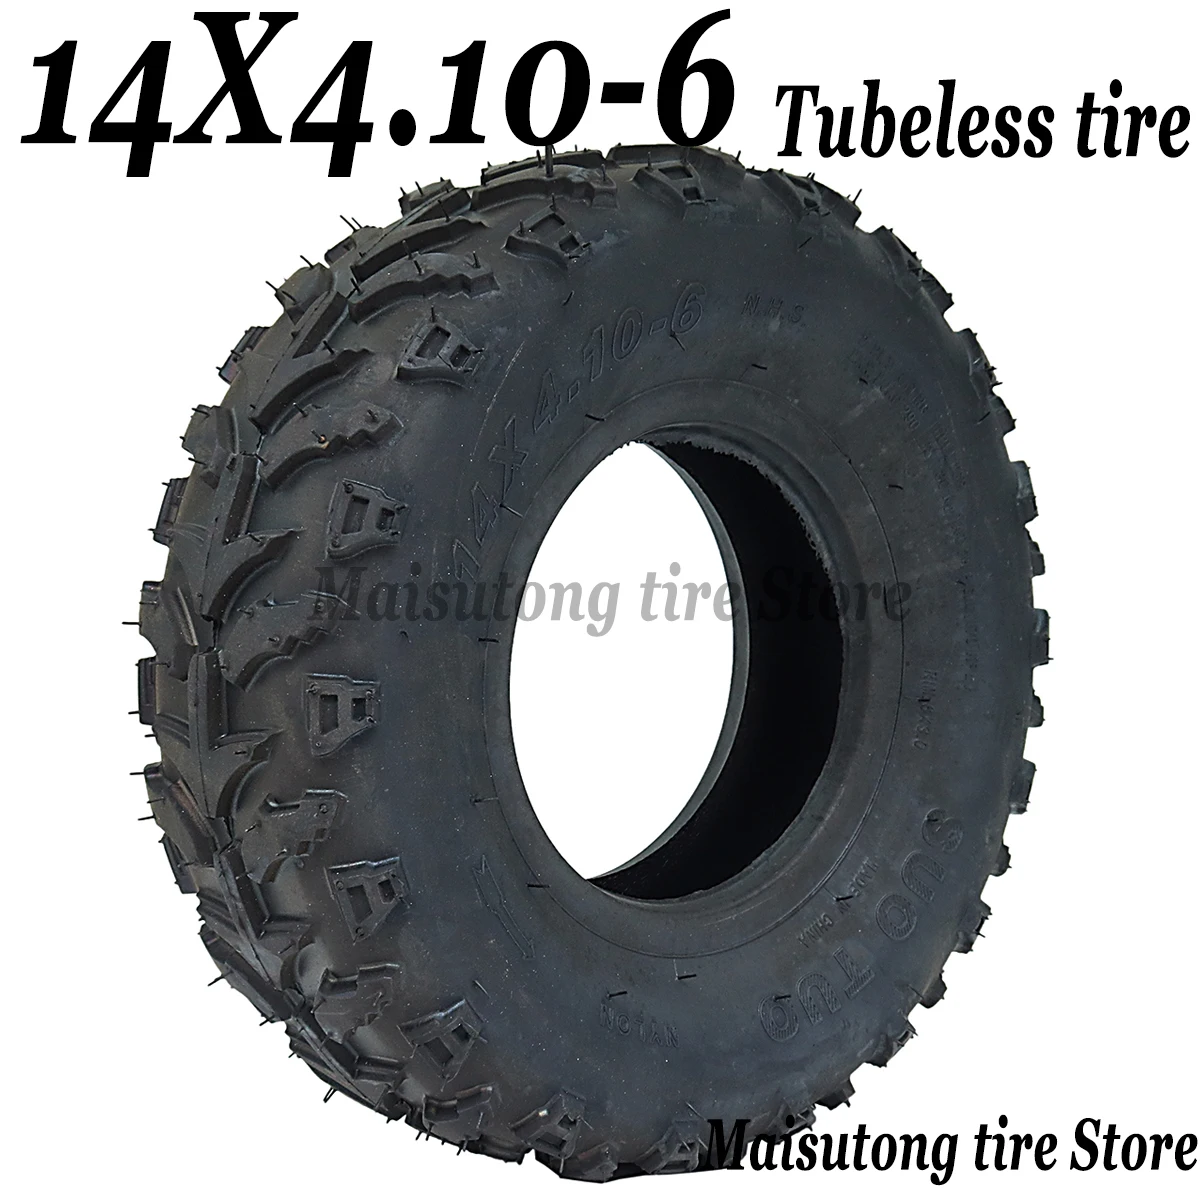 

14x4.10-6 Tyre Road Tubeless Tire 6 Inch For Fuel Electric 4 Racing Wheels Buggy Karting Car ATV QUAD Go Kart Parts